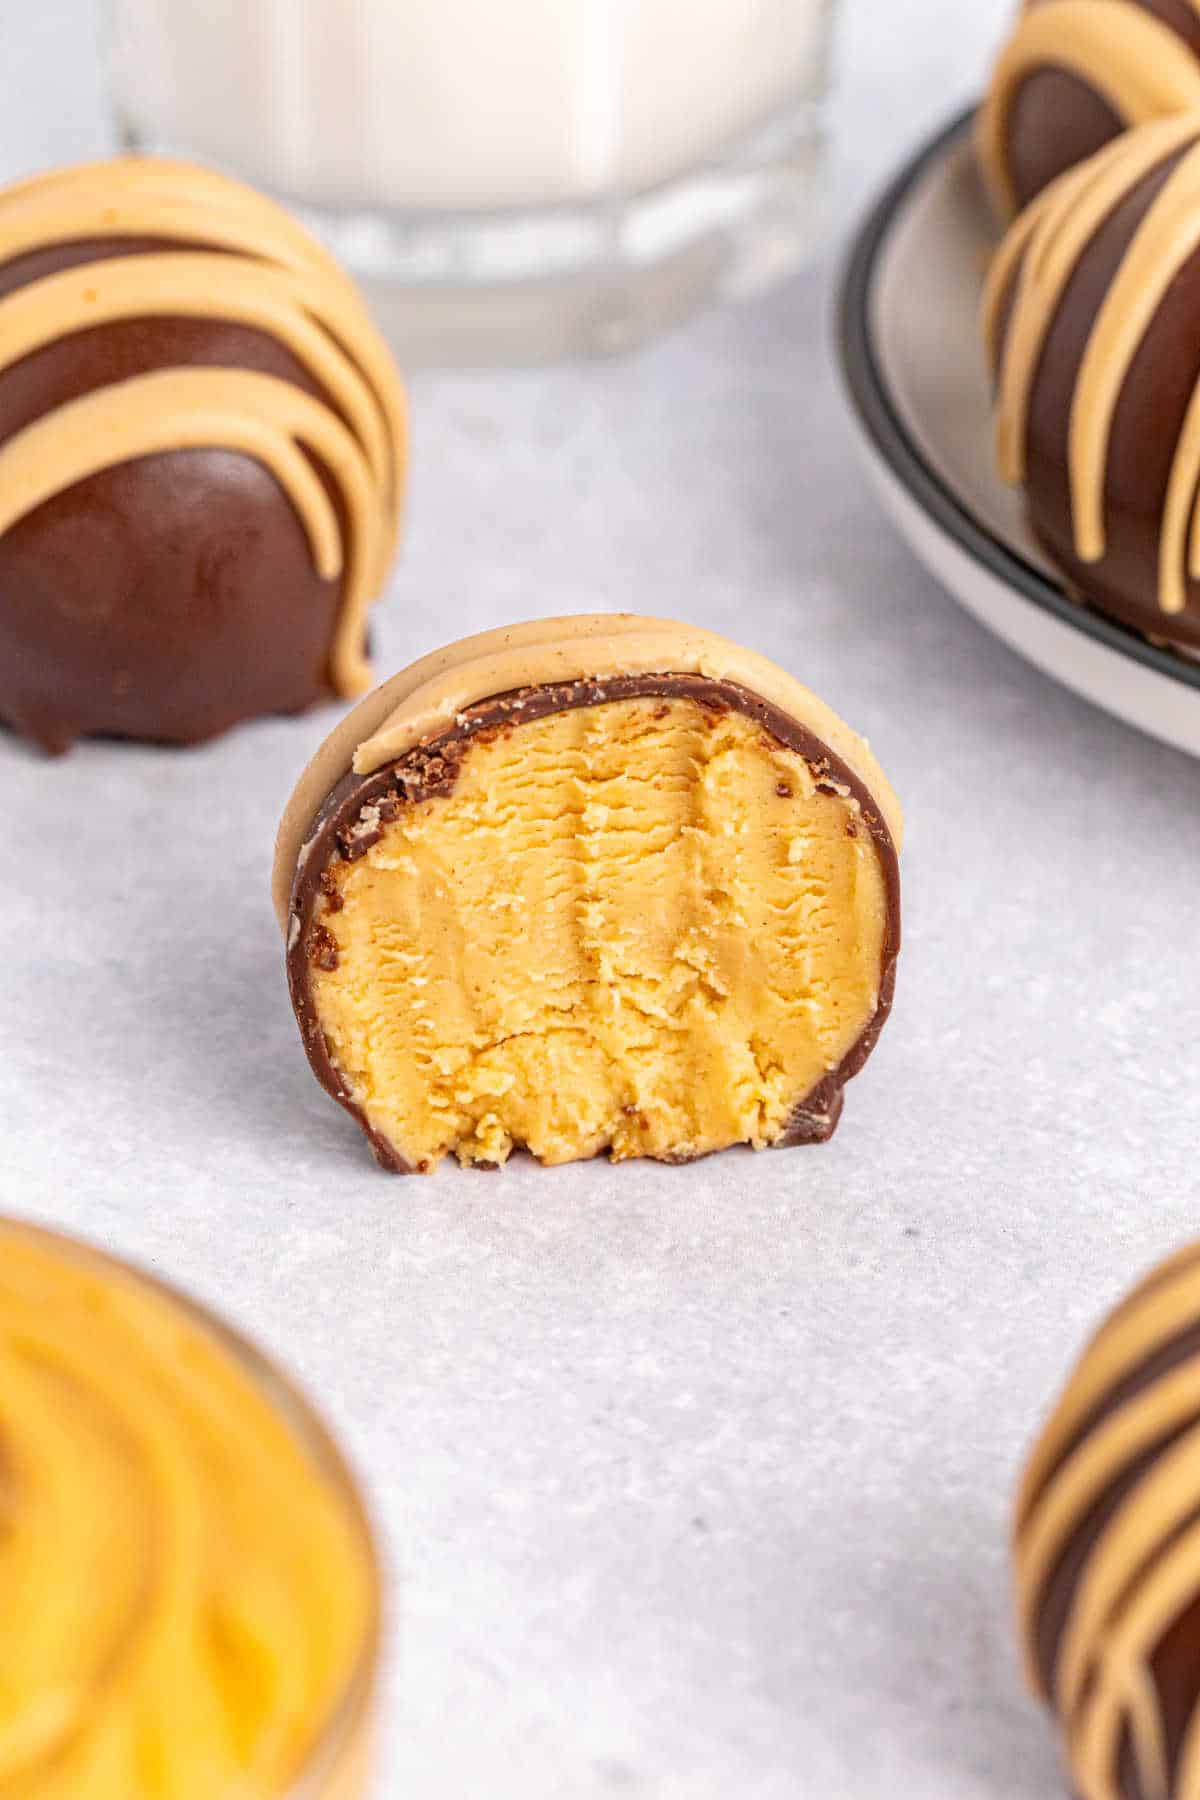 A chocolate peanut butter ball with a bite out of it.